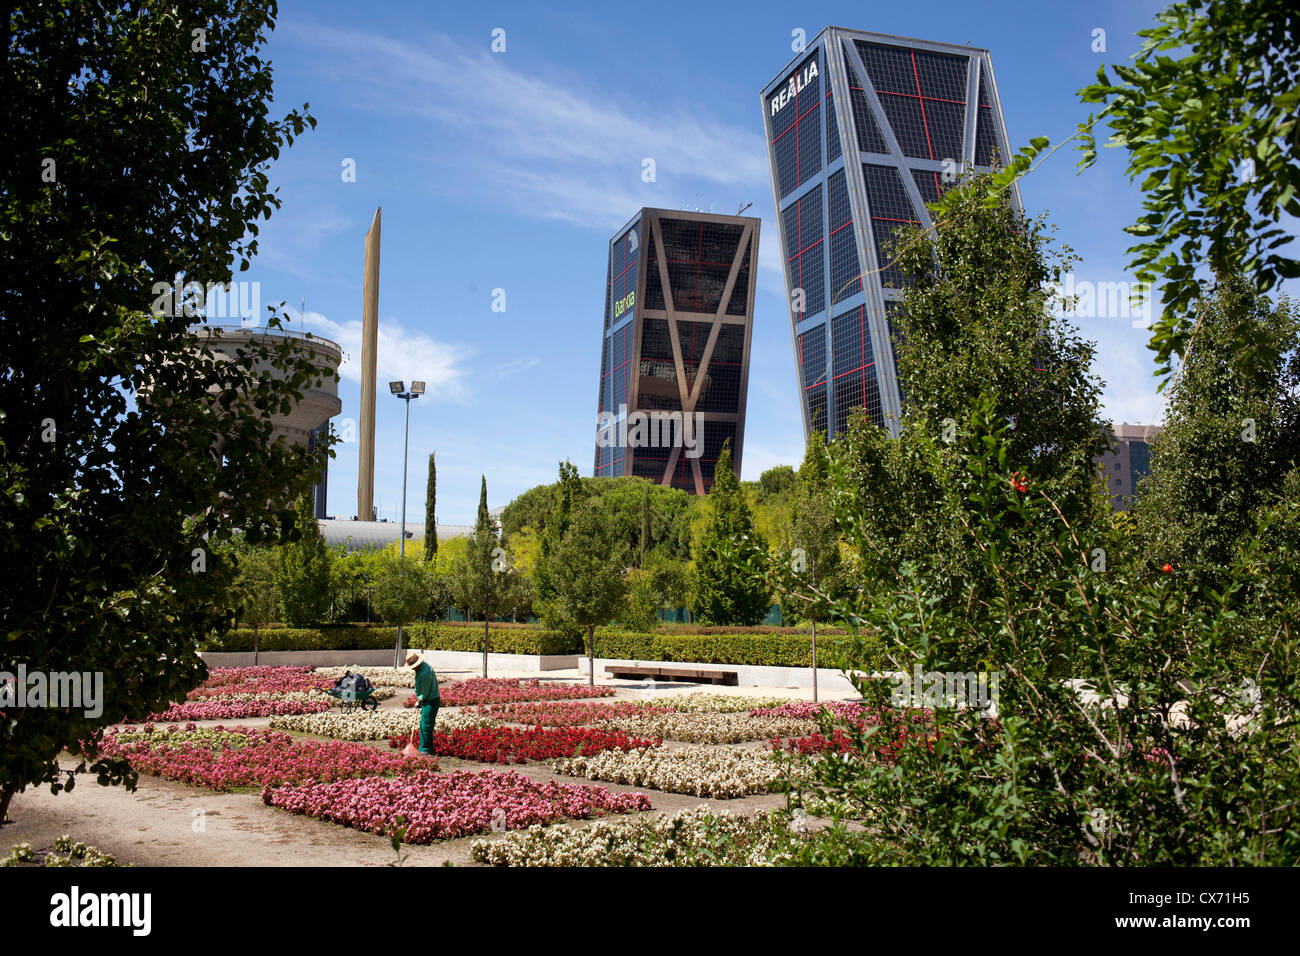 A gardener tends to flowers in the Parque Cuarto Deposito, Canal de Isabell II in front of the two leaning towers,Torres Kio, Stock Photo